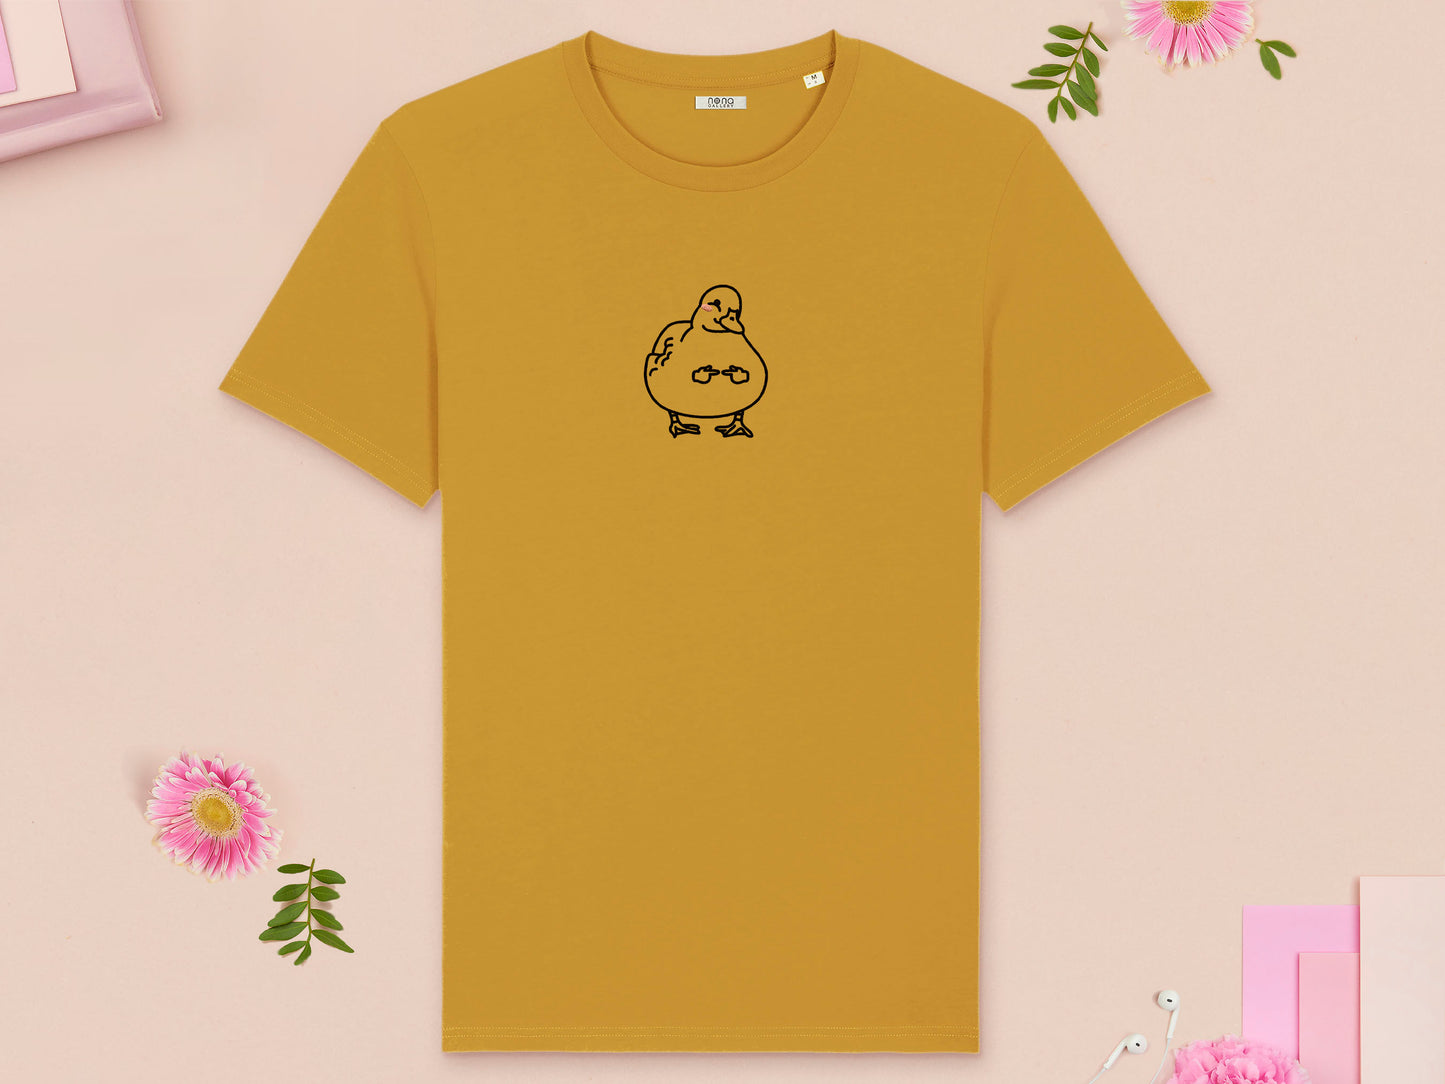 A yellow crew neck short sleeve t-shirt, with an embroidered black thread design of cute blushing duck with the for me finger hand emoji symbols